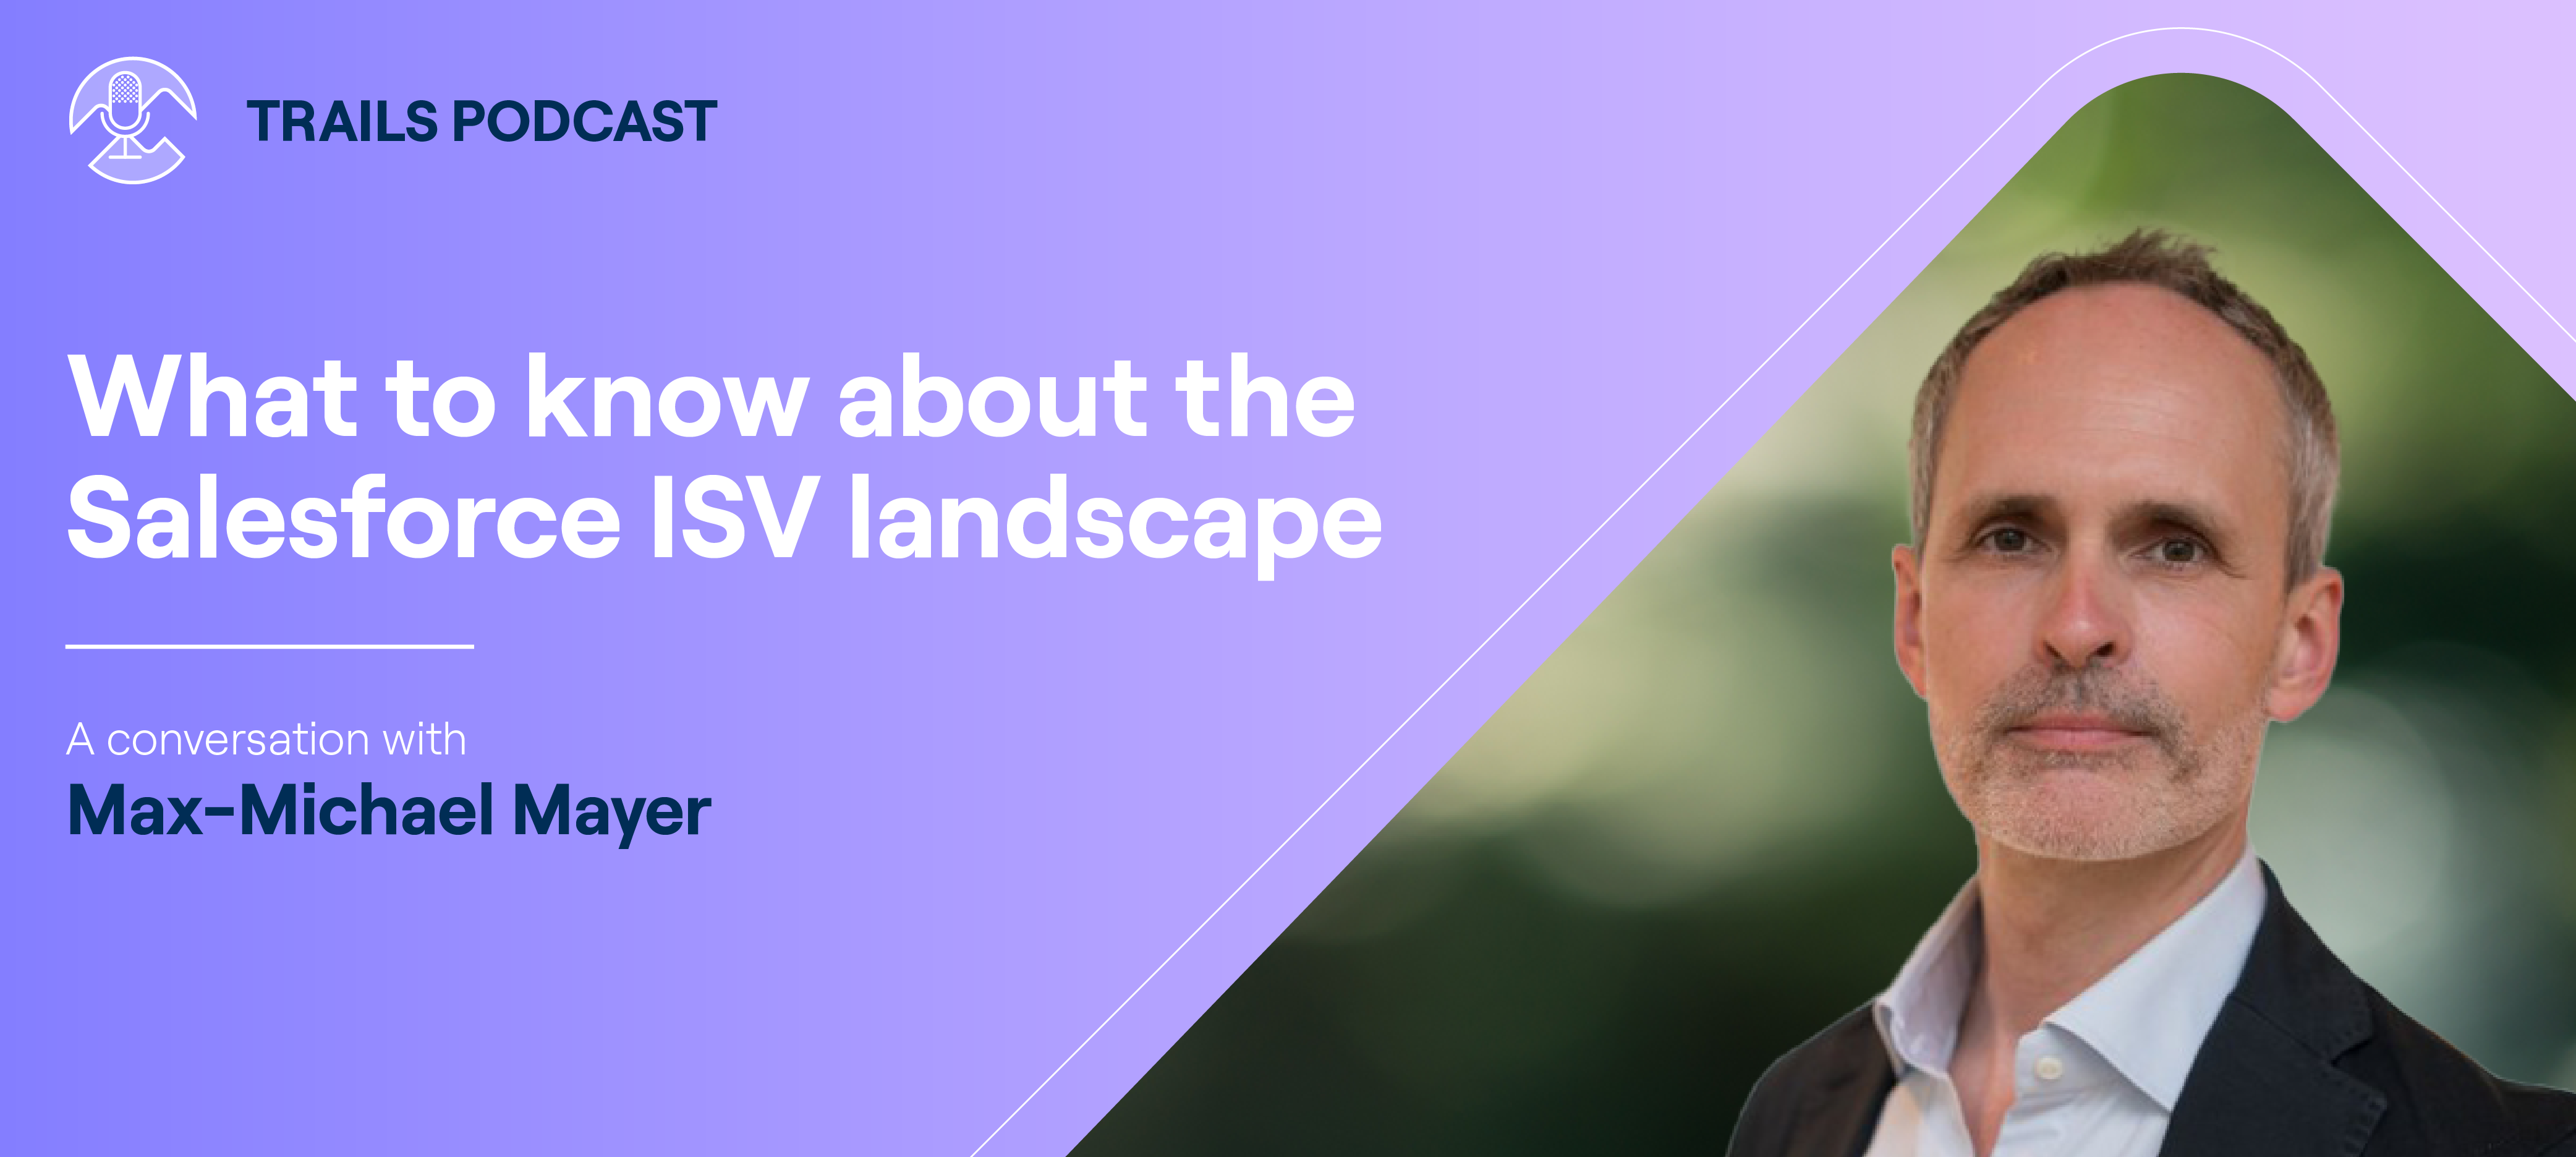 What to know about the Salesforce ISV landscape  (Trails Podcast episode #5 with Max-Michael Mayer)